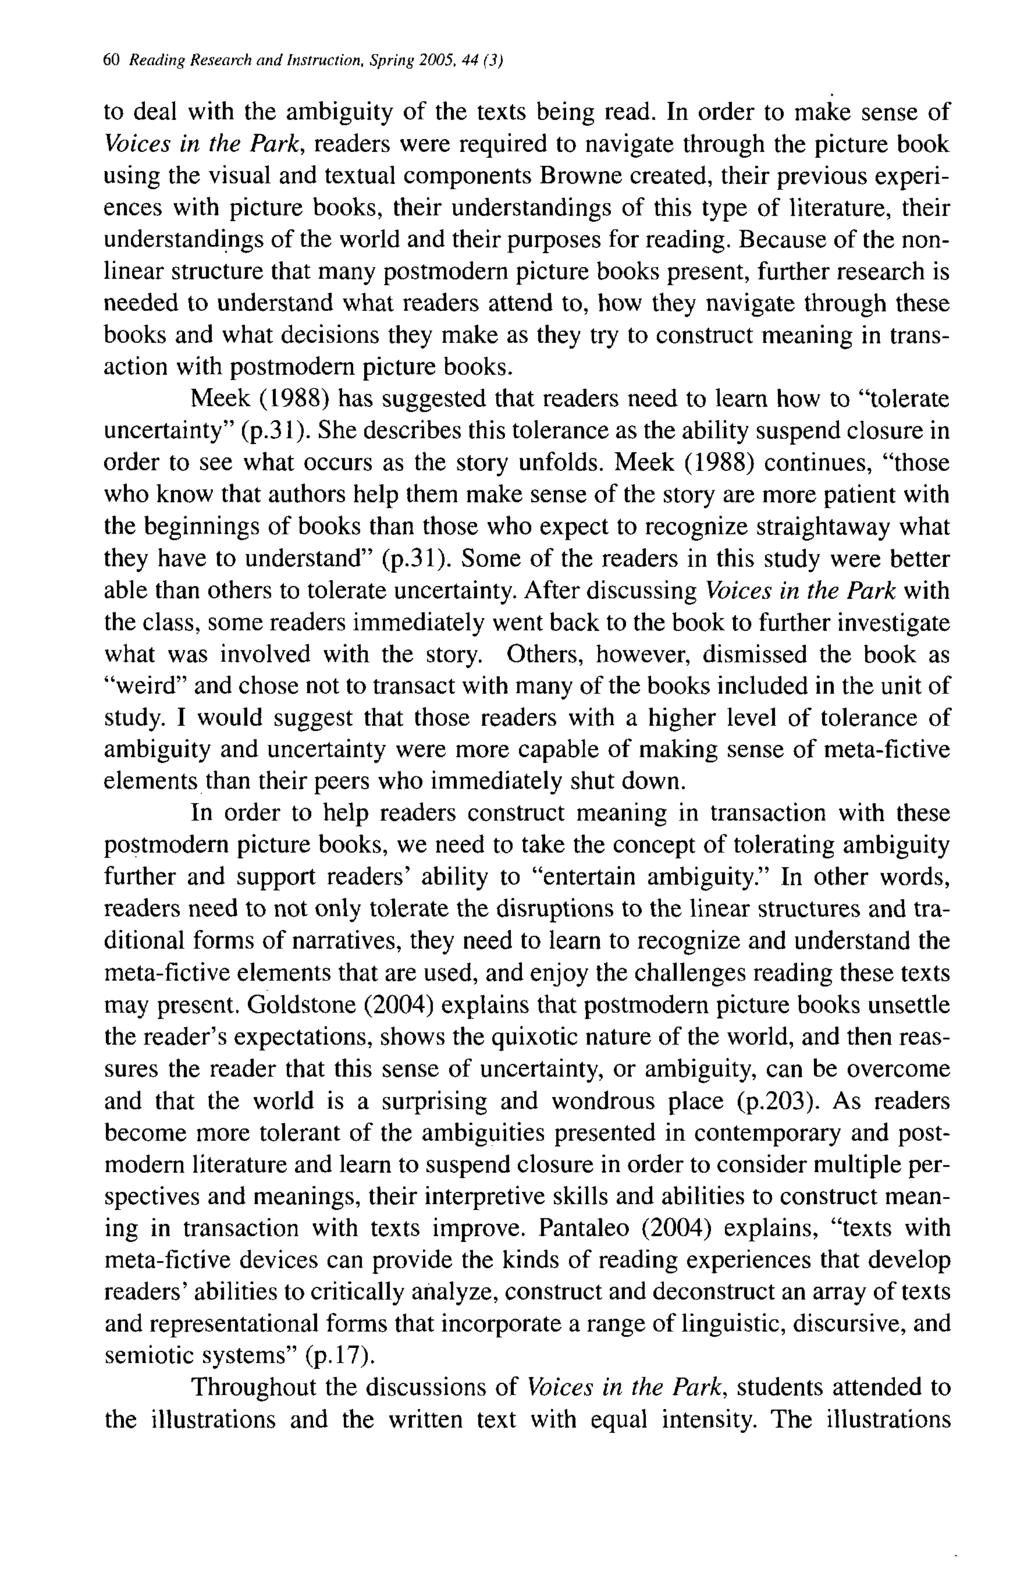 60 Reading Research and Instruction, Spring 2005, 44 (3) to deal with the ambiguity of the texts being read.